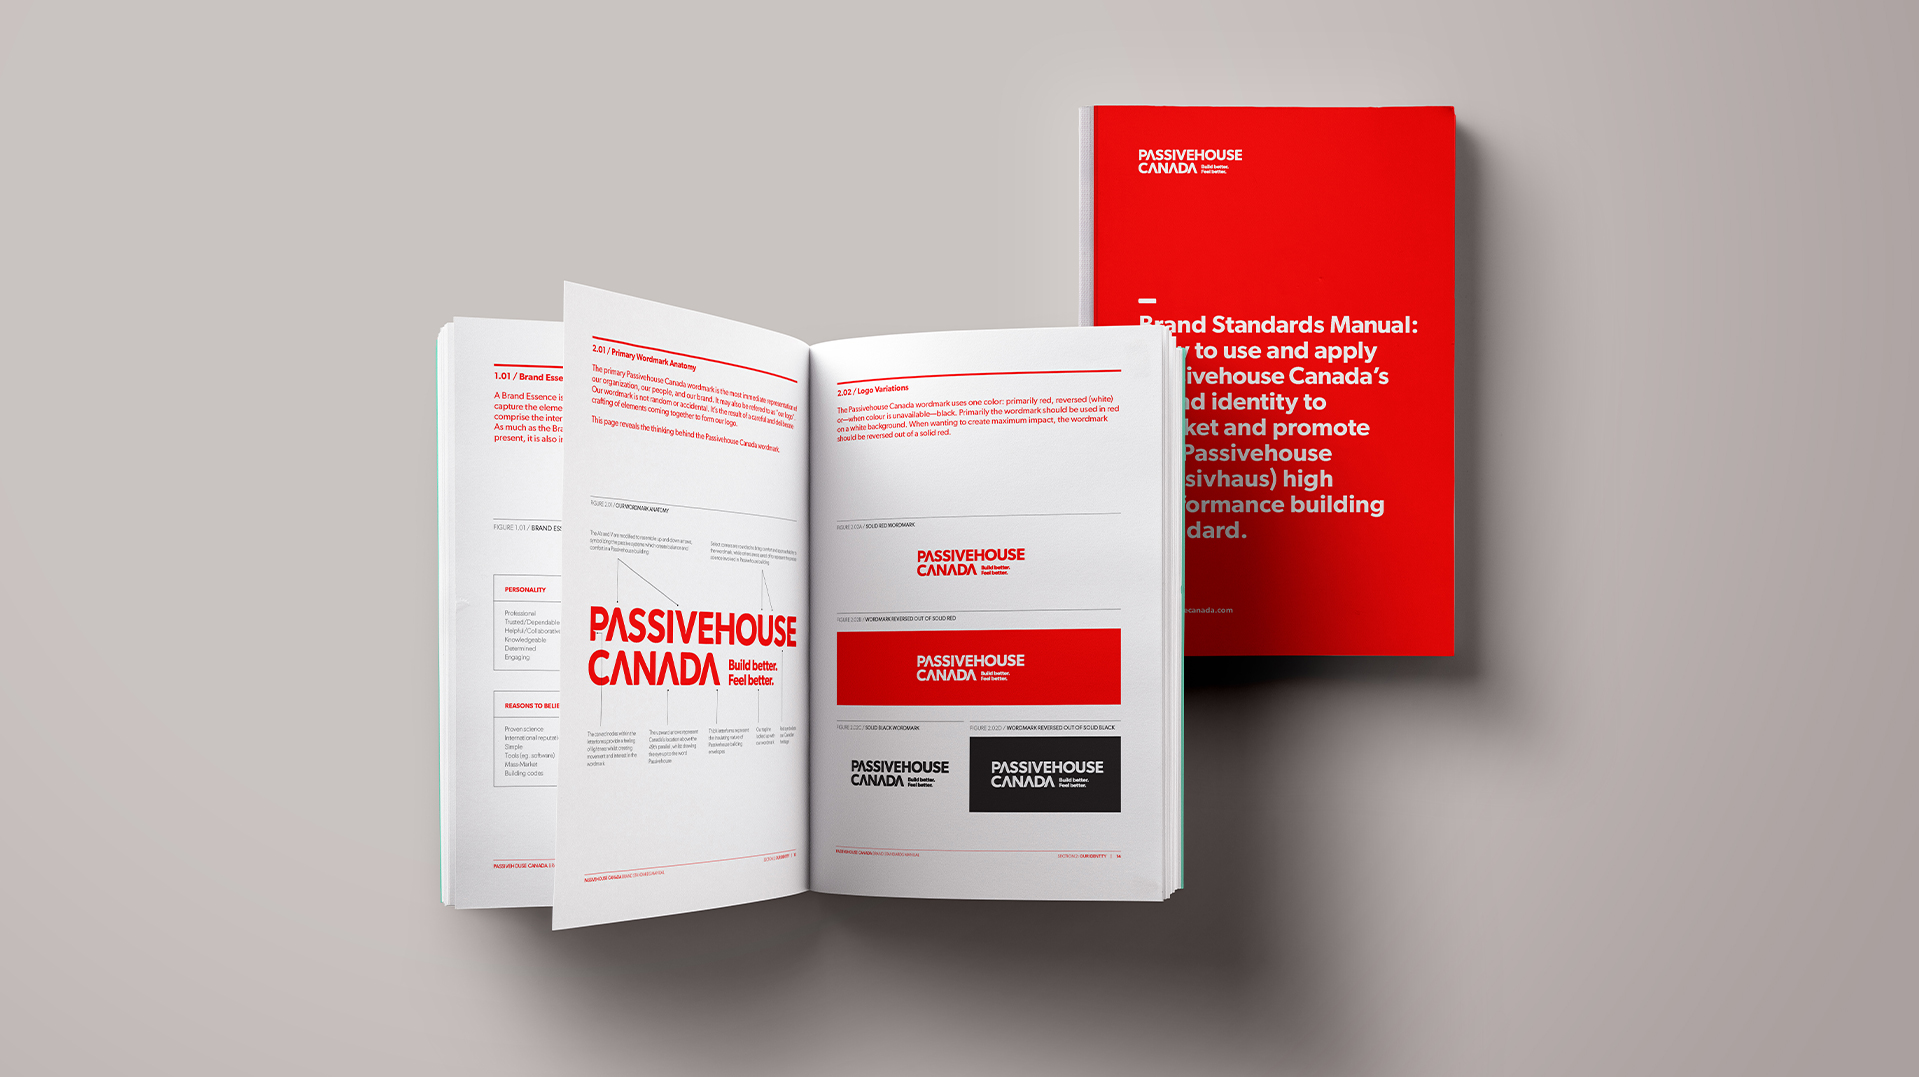 Brand standards manual outlining the brand guidelines